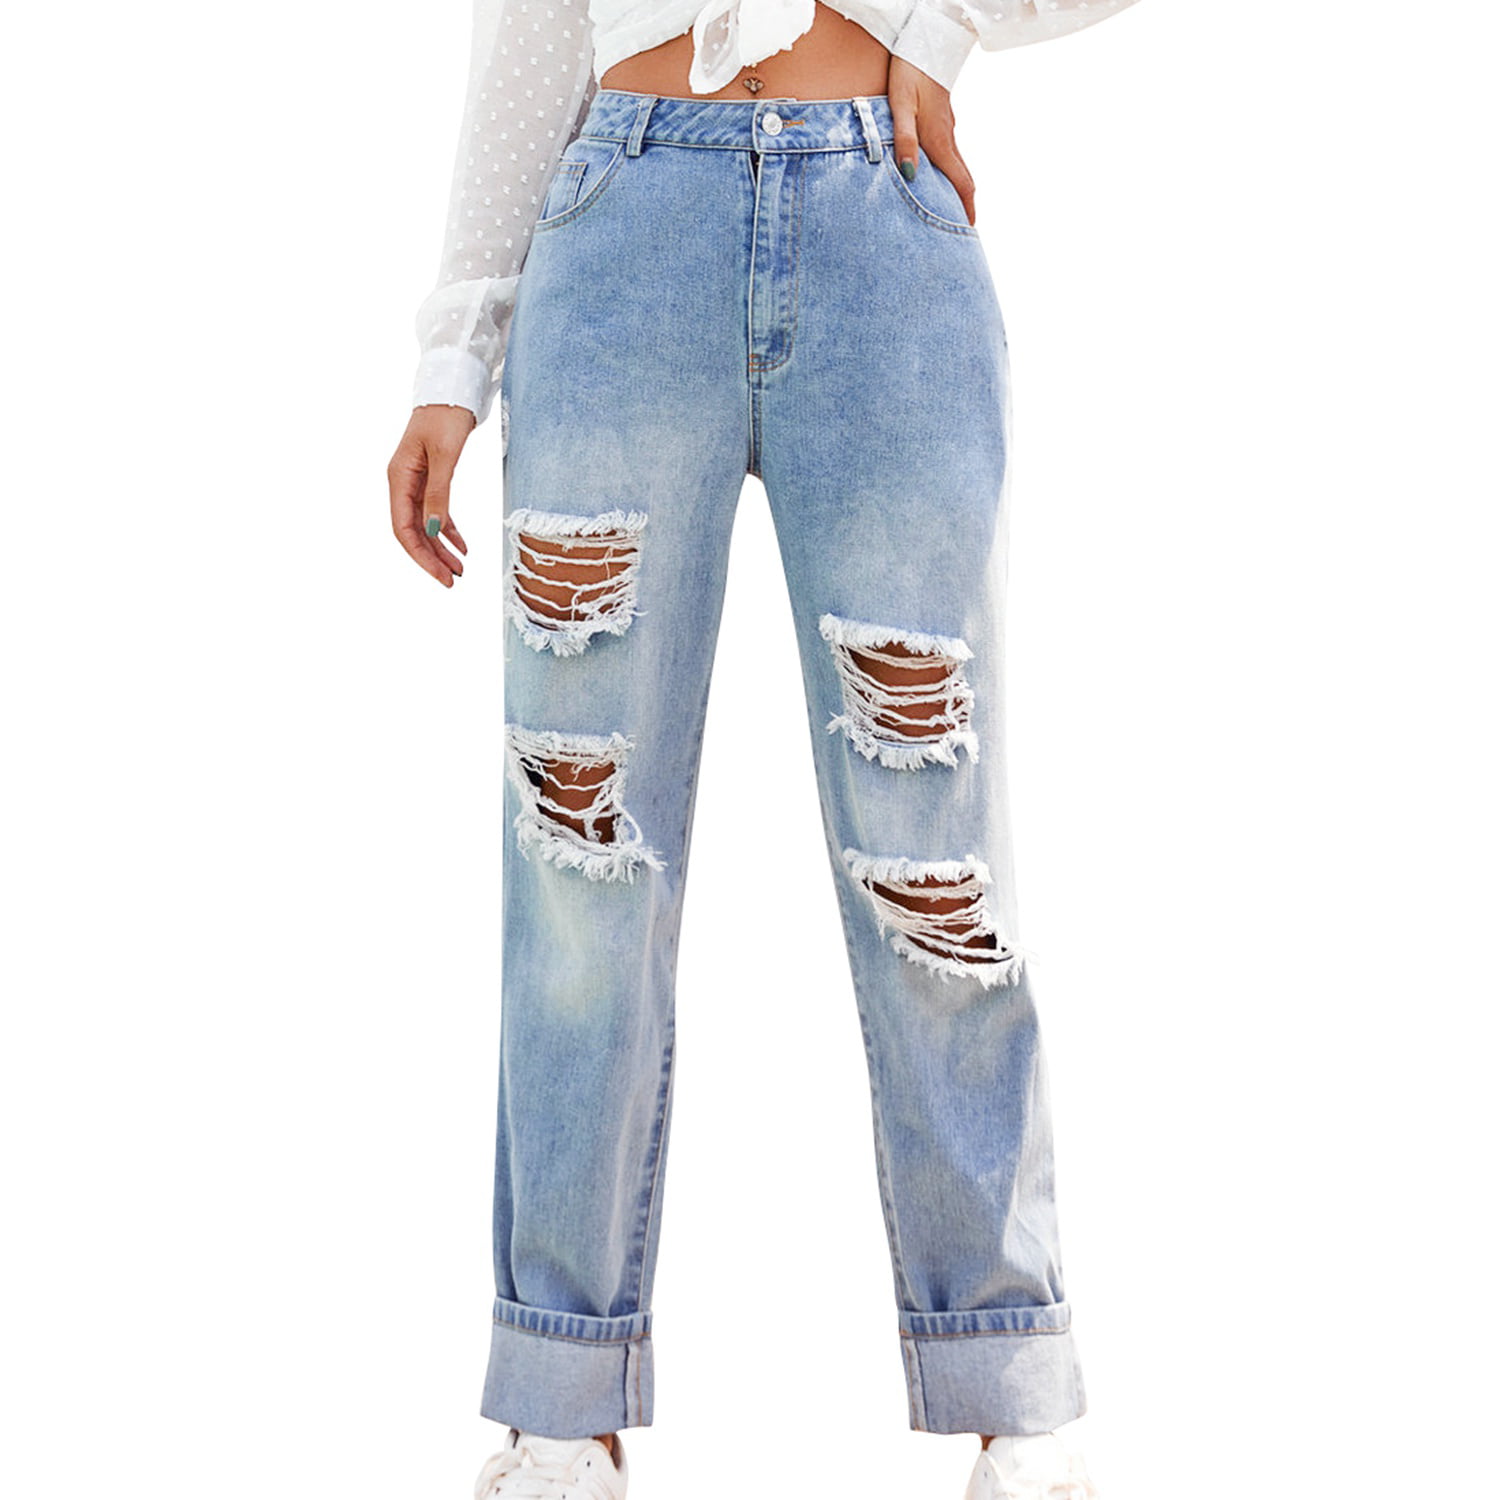 Toelating Ontvanger Lucky Wash Bleaching Female Ripped Jeans For Women Casual Pencil Pants Mom Jeans  High Waist Denim Skinny Jeans XS - Walmart.com